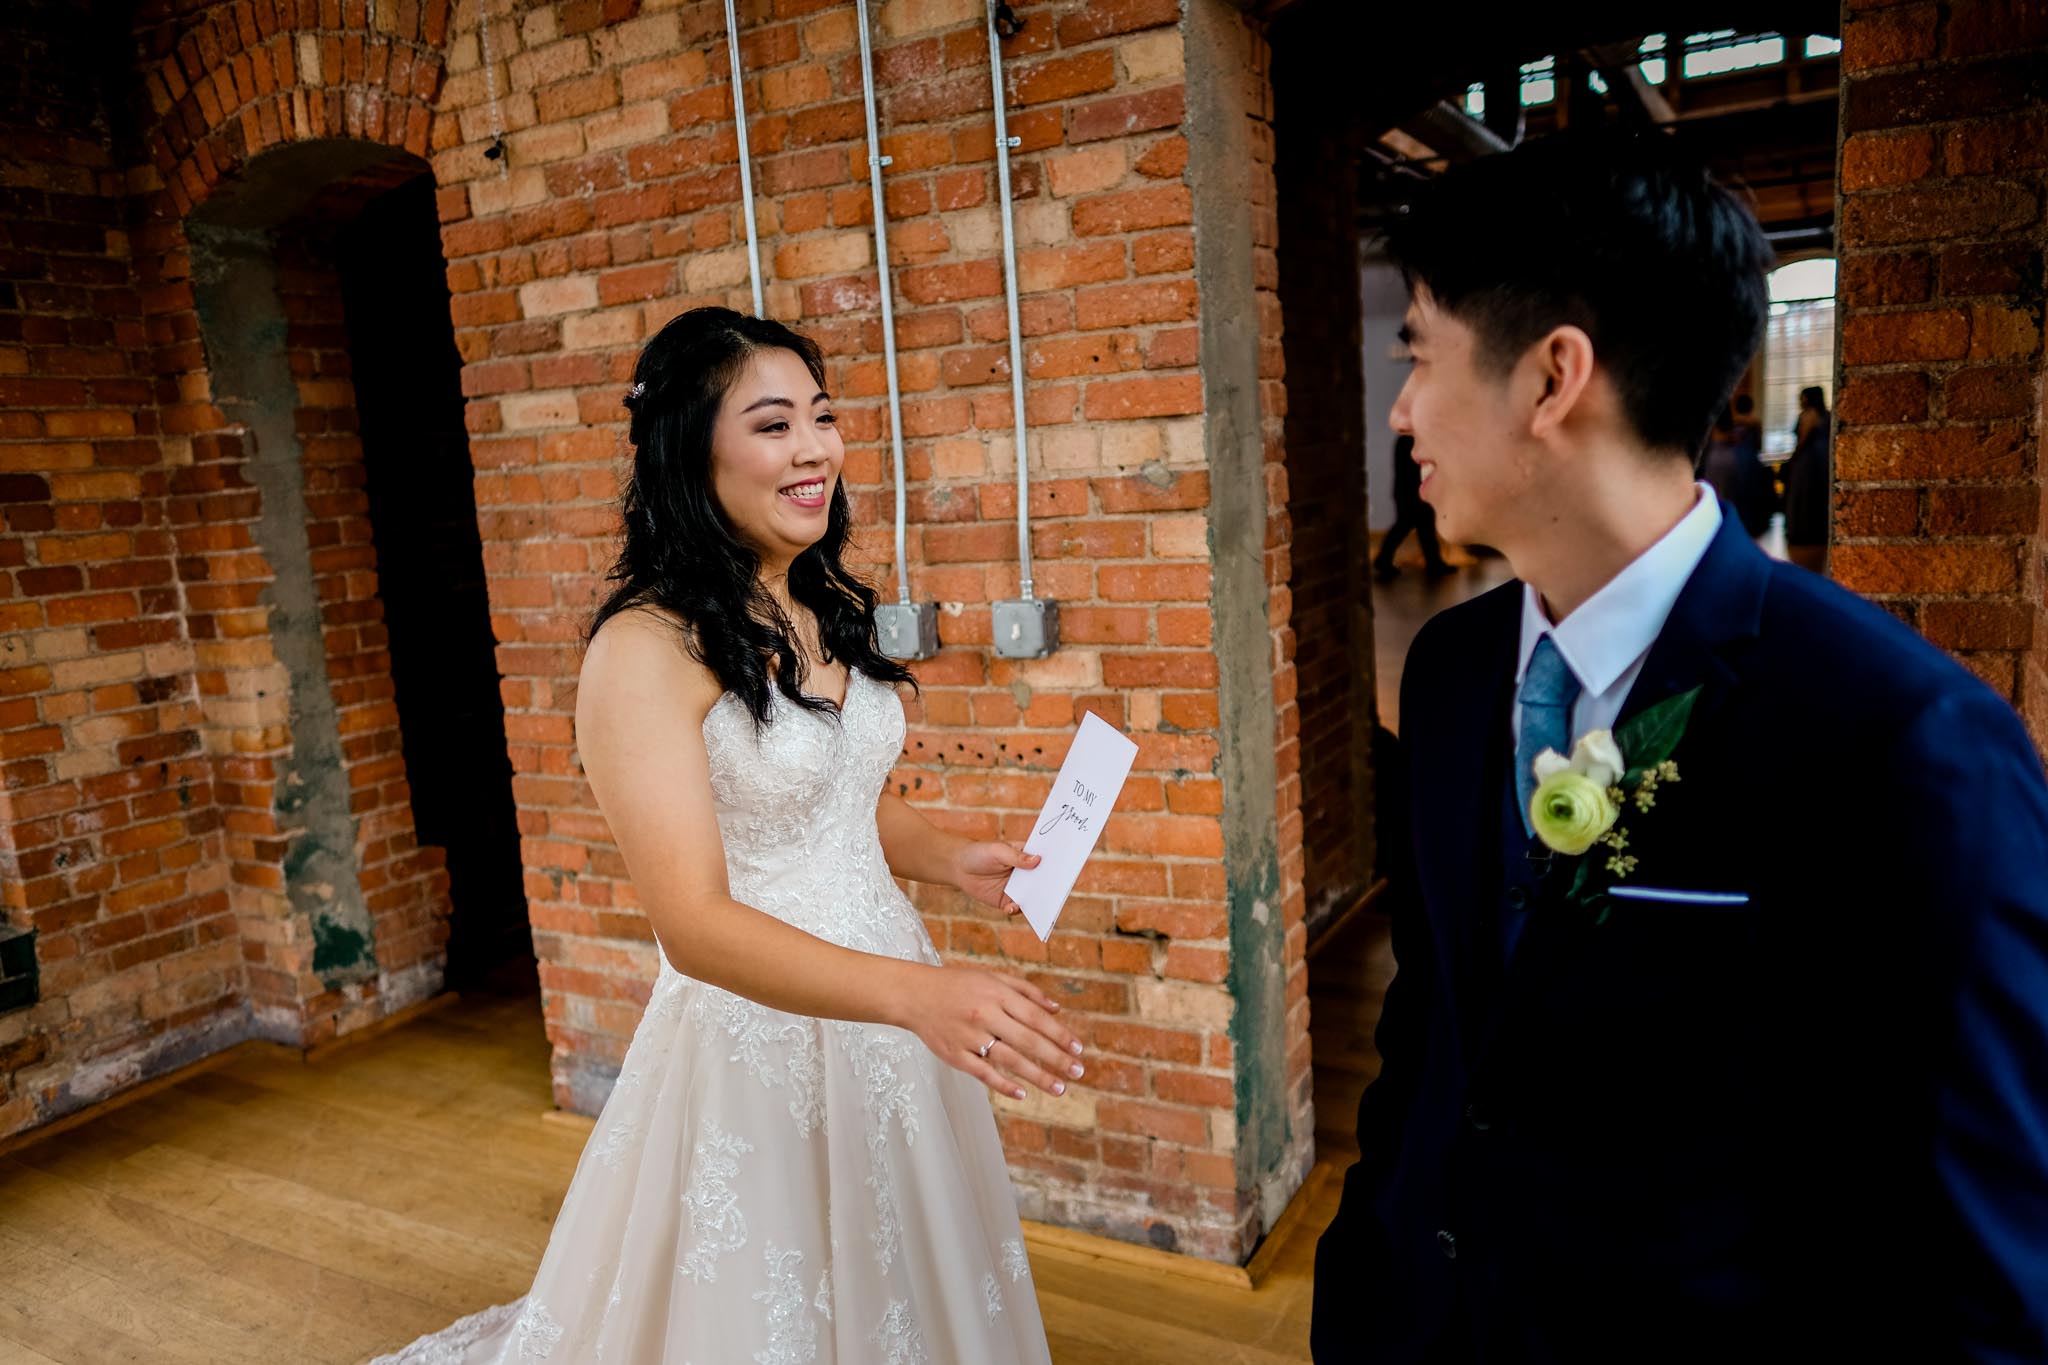 Bride and groom seeing each other for first time | Durham Wedding Photographer | The Cotton Room | By G. Lin Photography